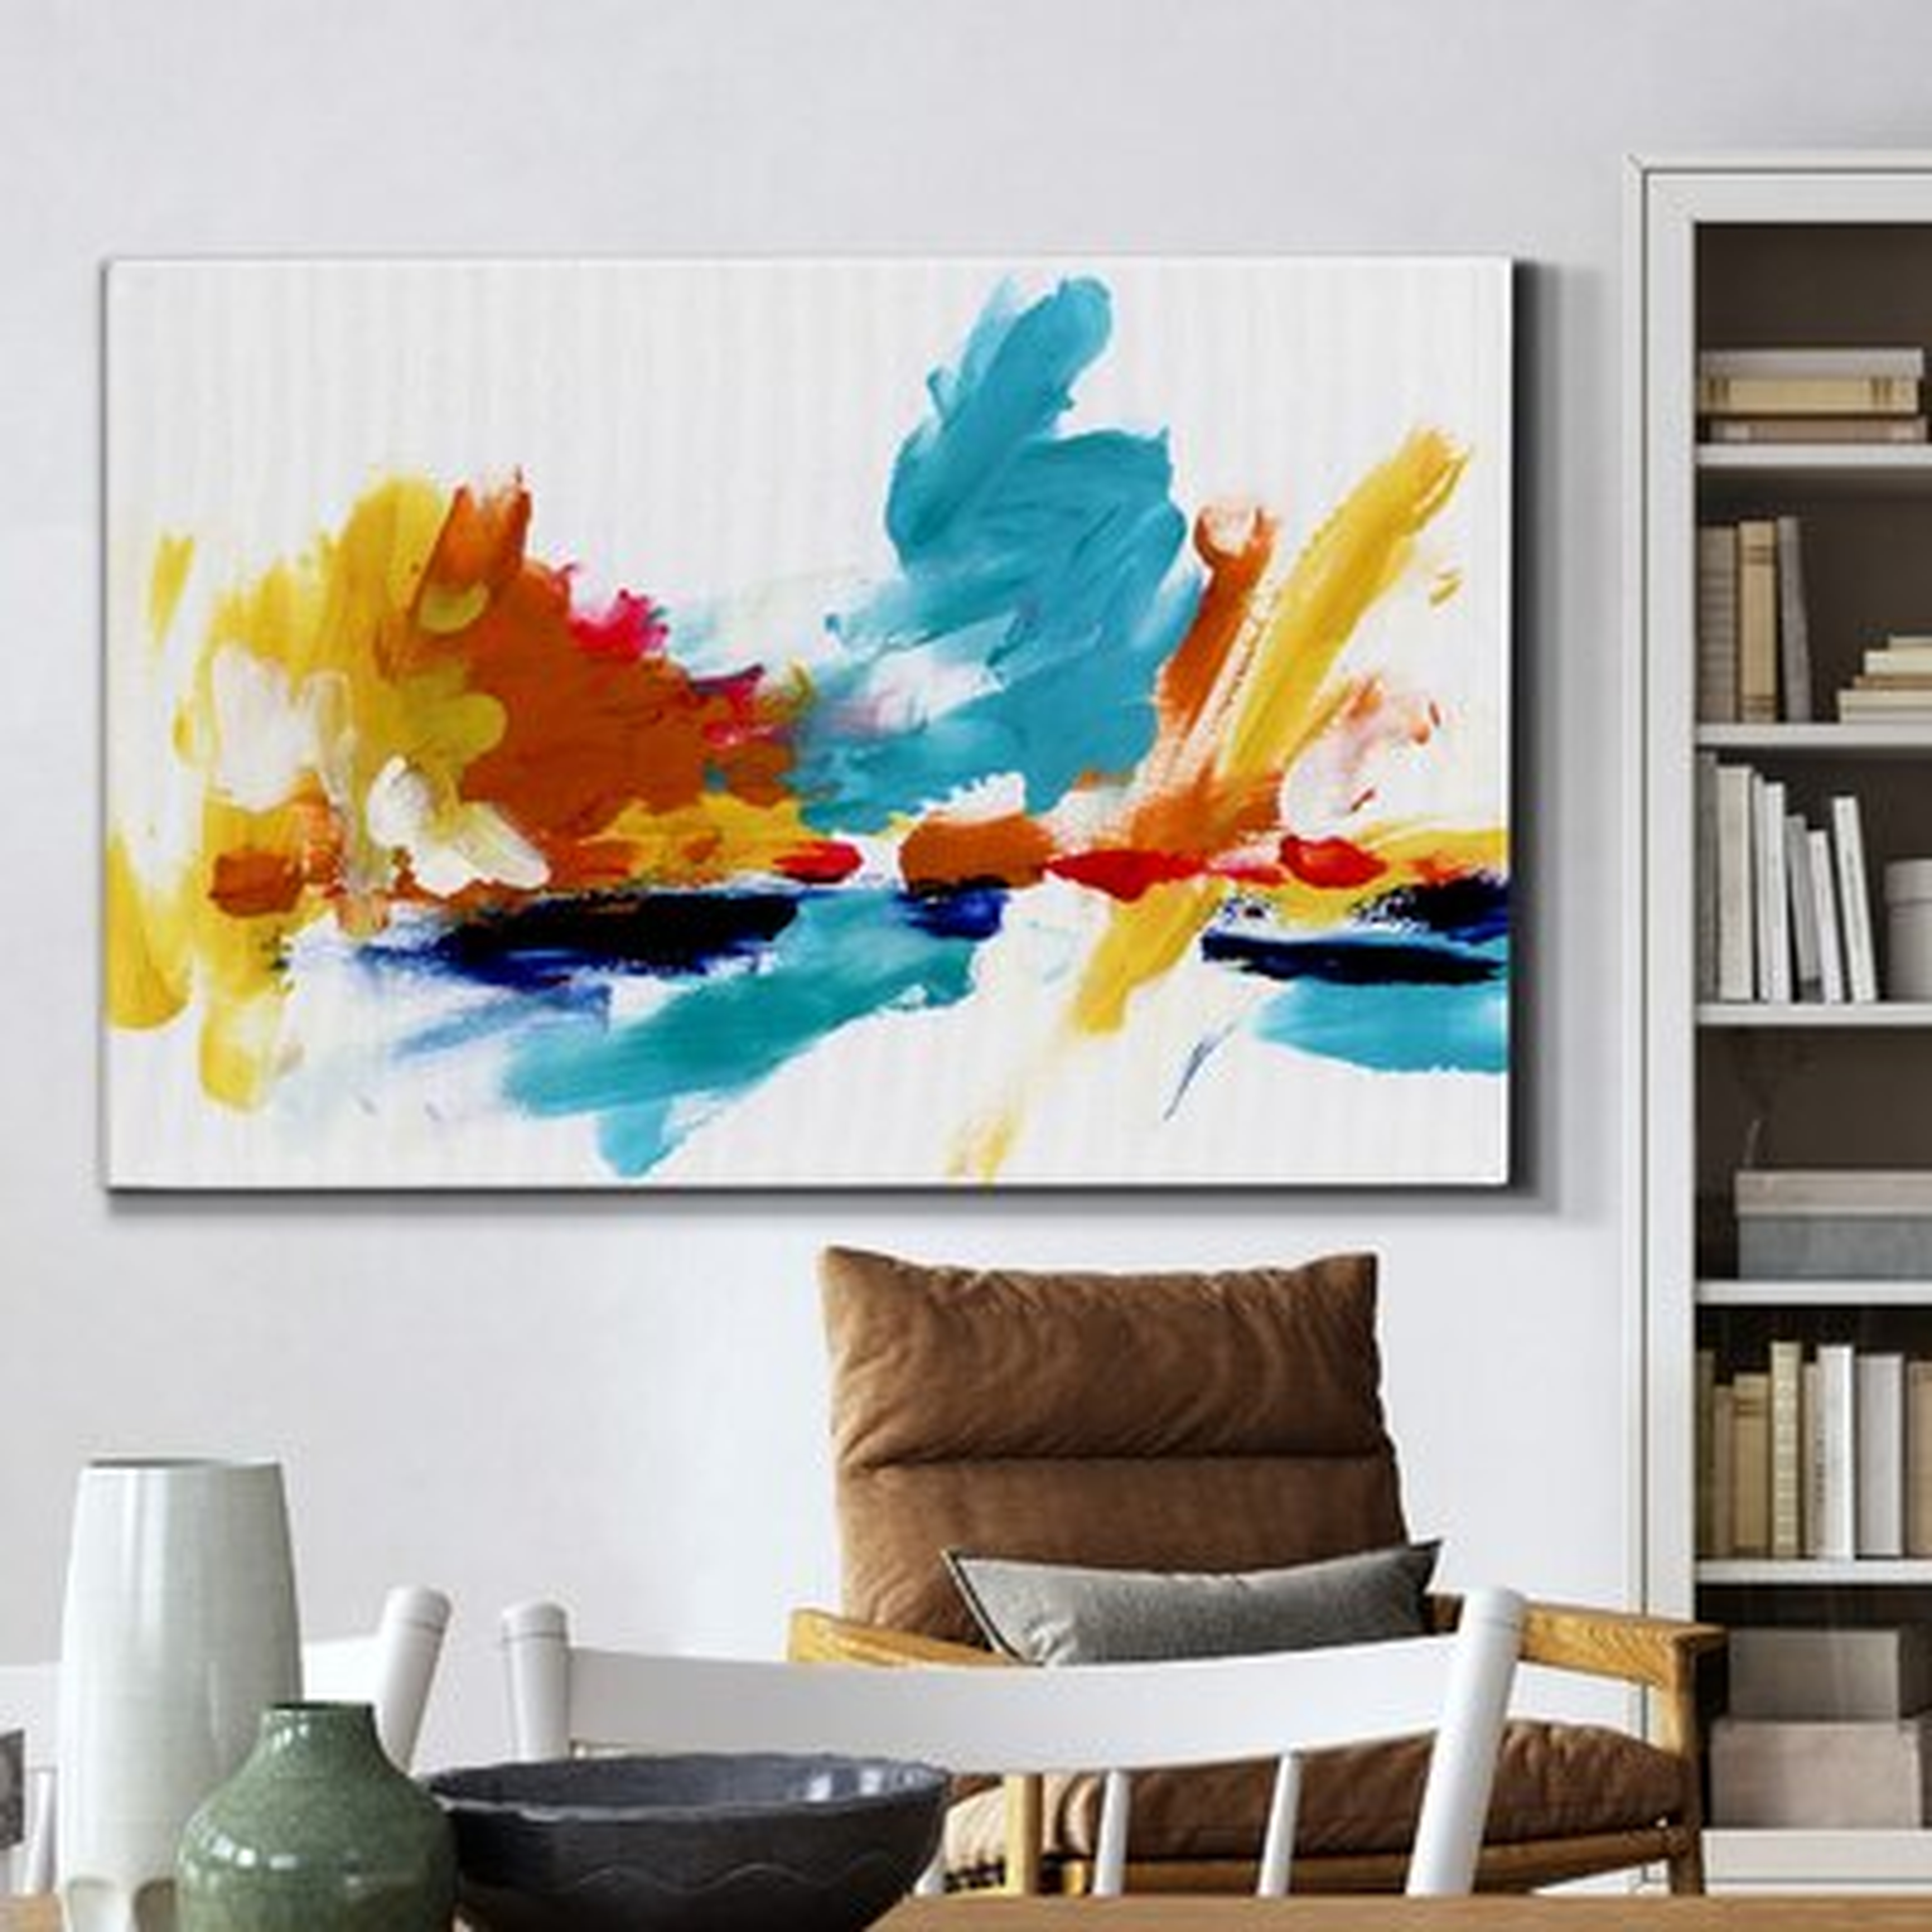 Captive Color II - Wrapped Canvas Painting Print - Wayfair